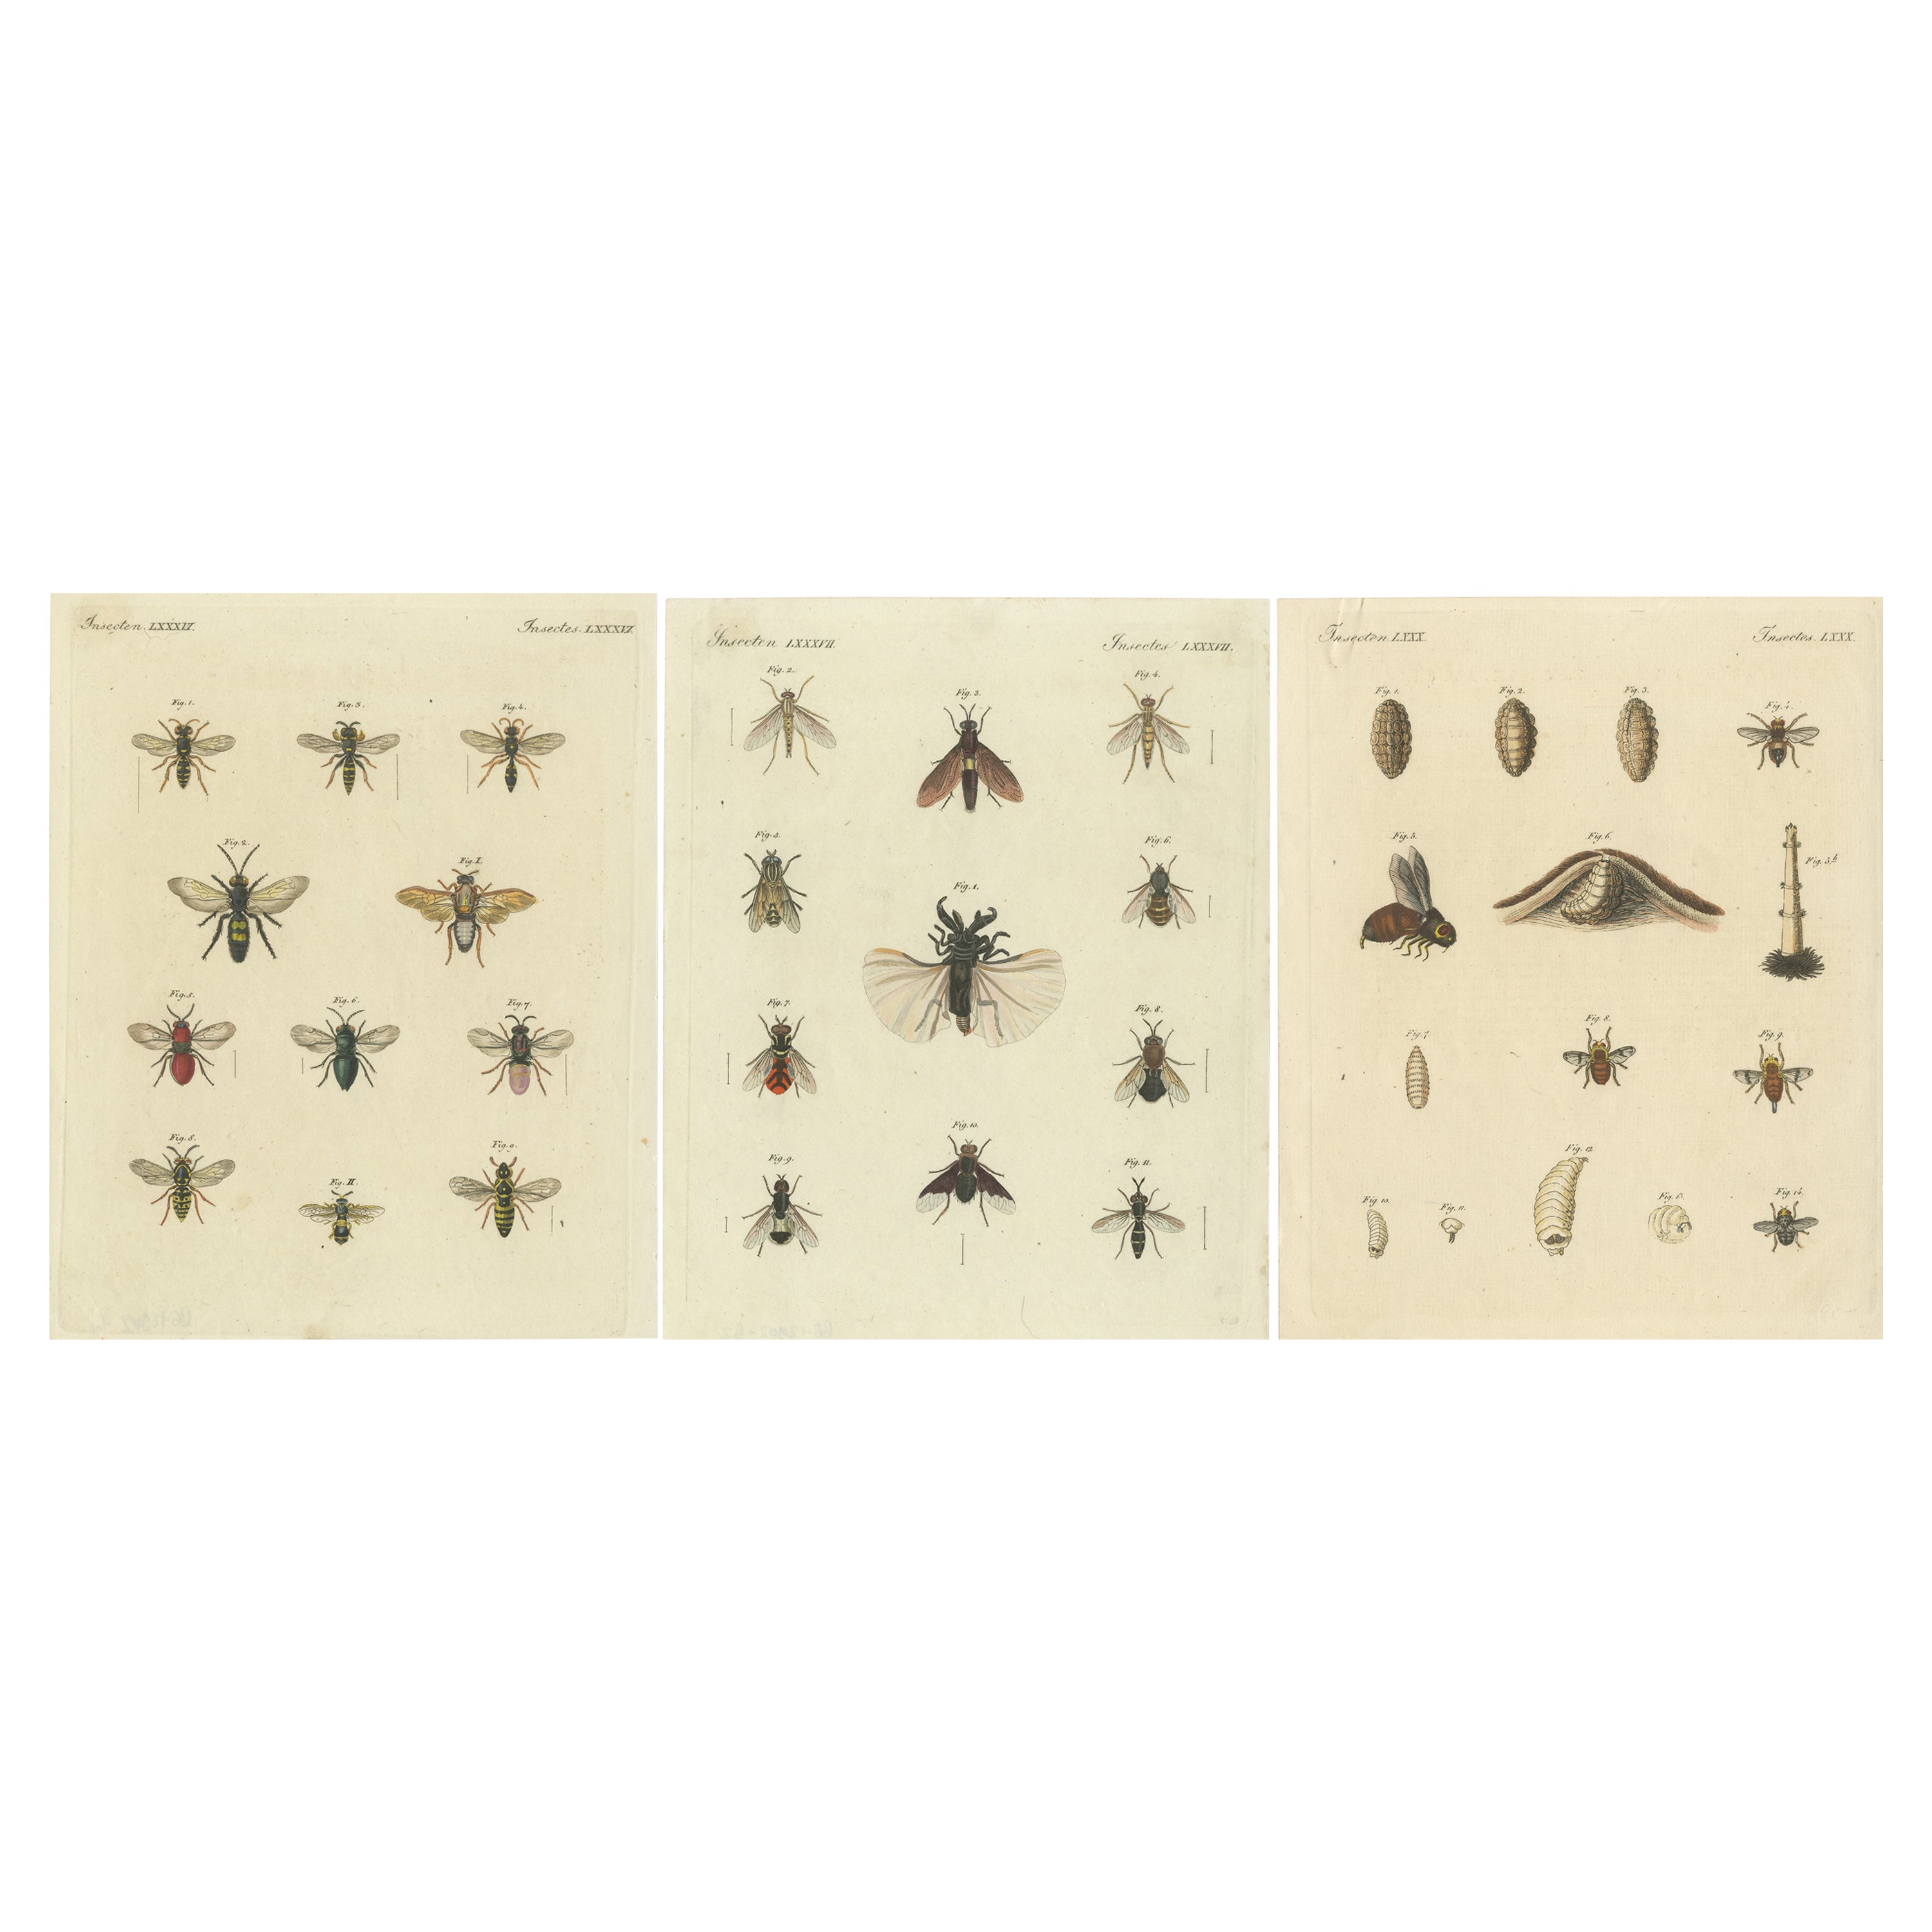 Set of 3 Antique Prints of various Insects including Wasps and Flies